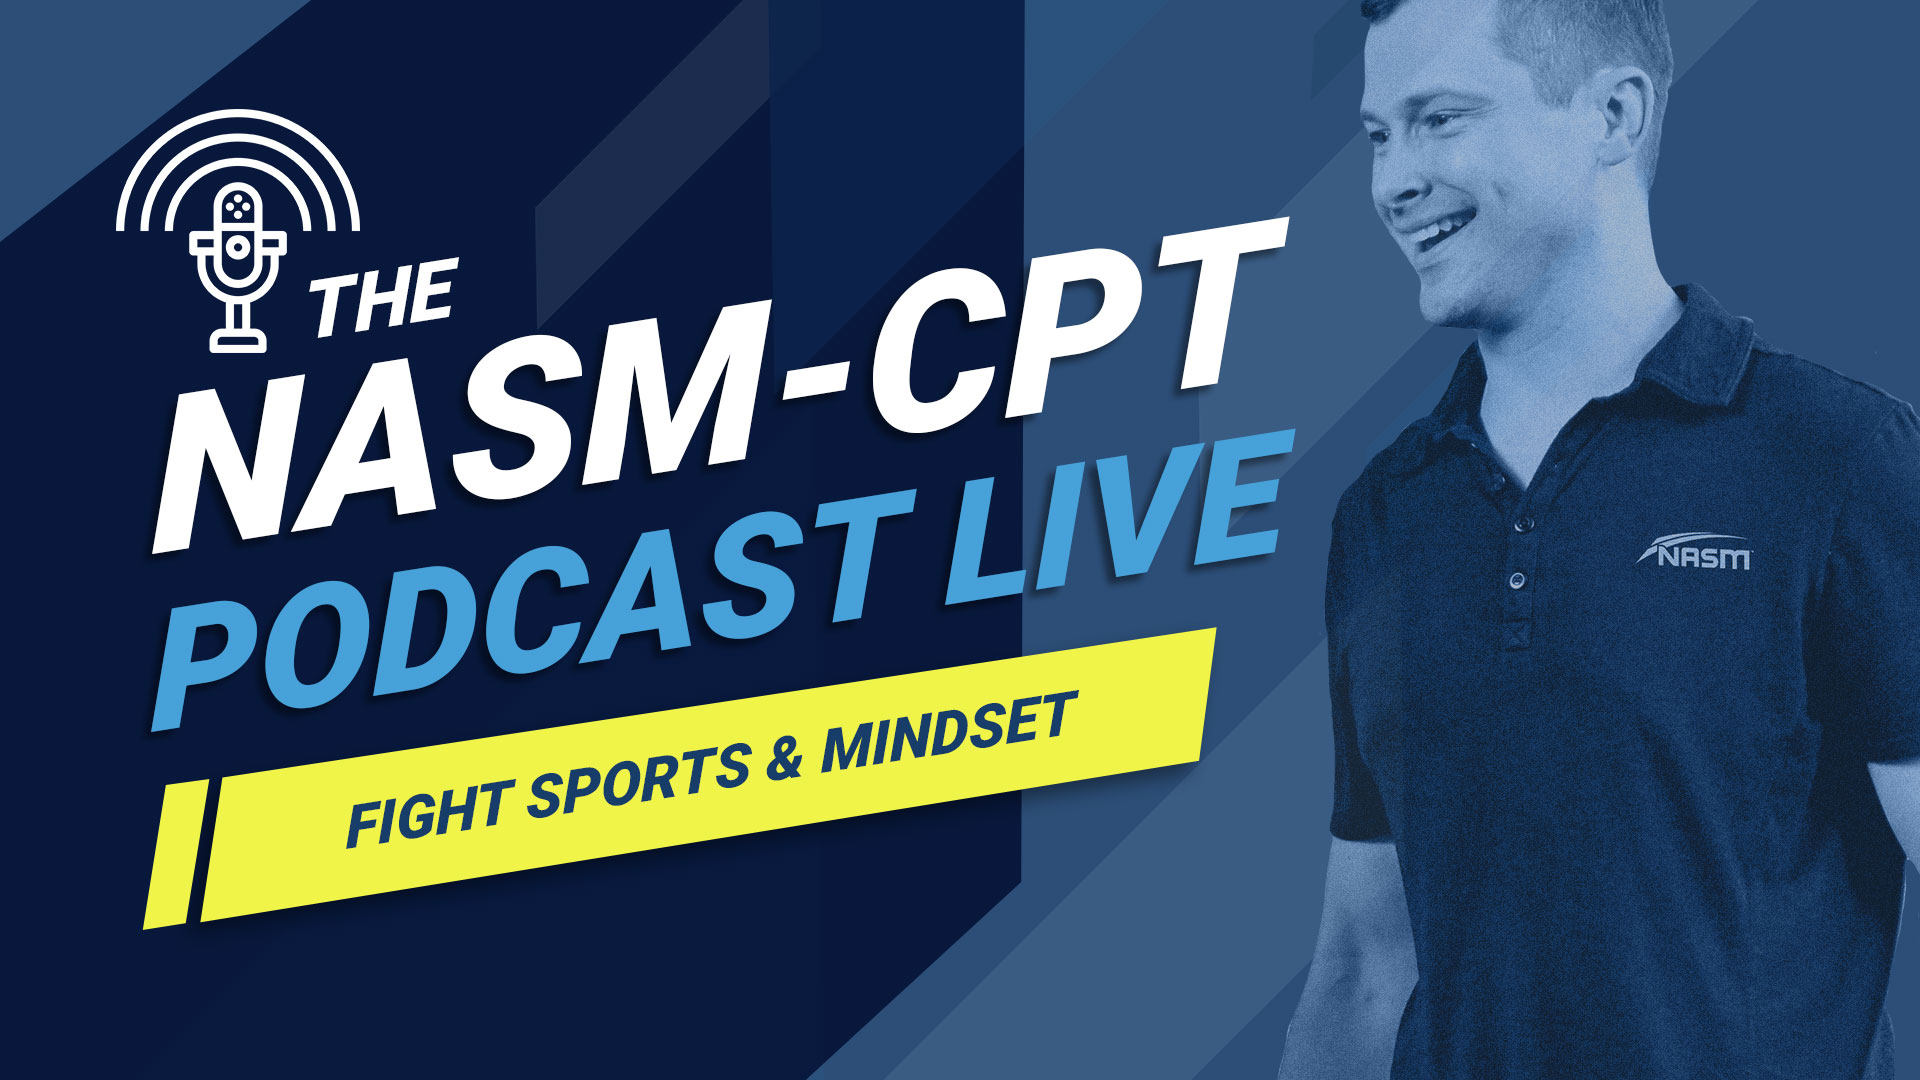 fight sports episode banner for NASM CPT podcast